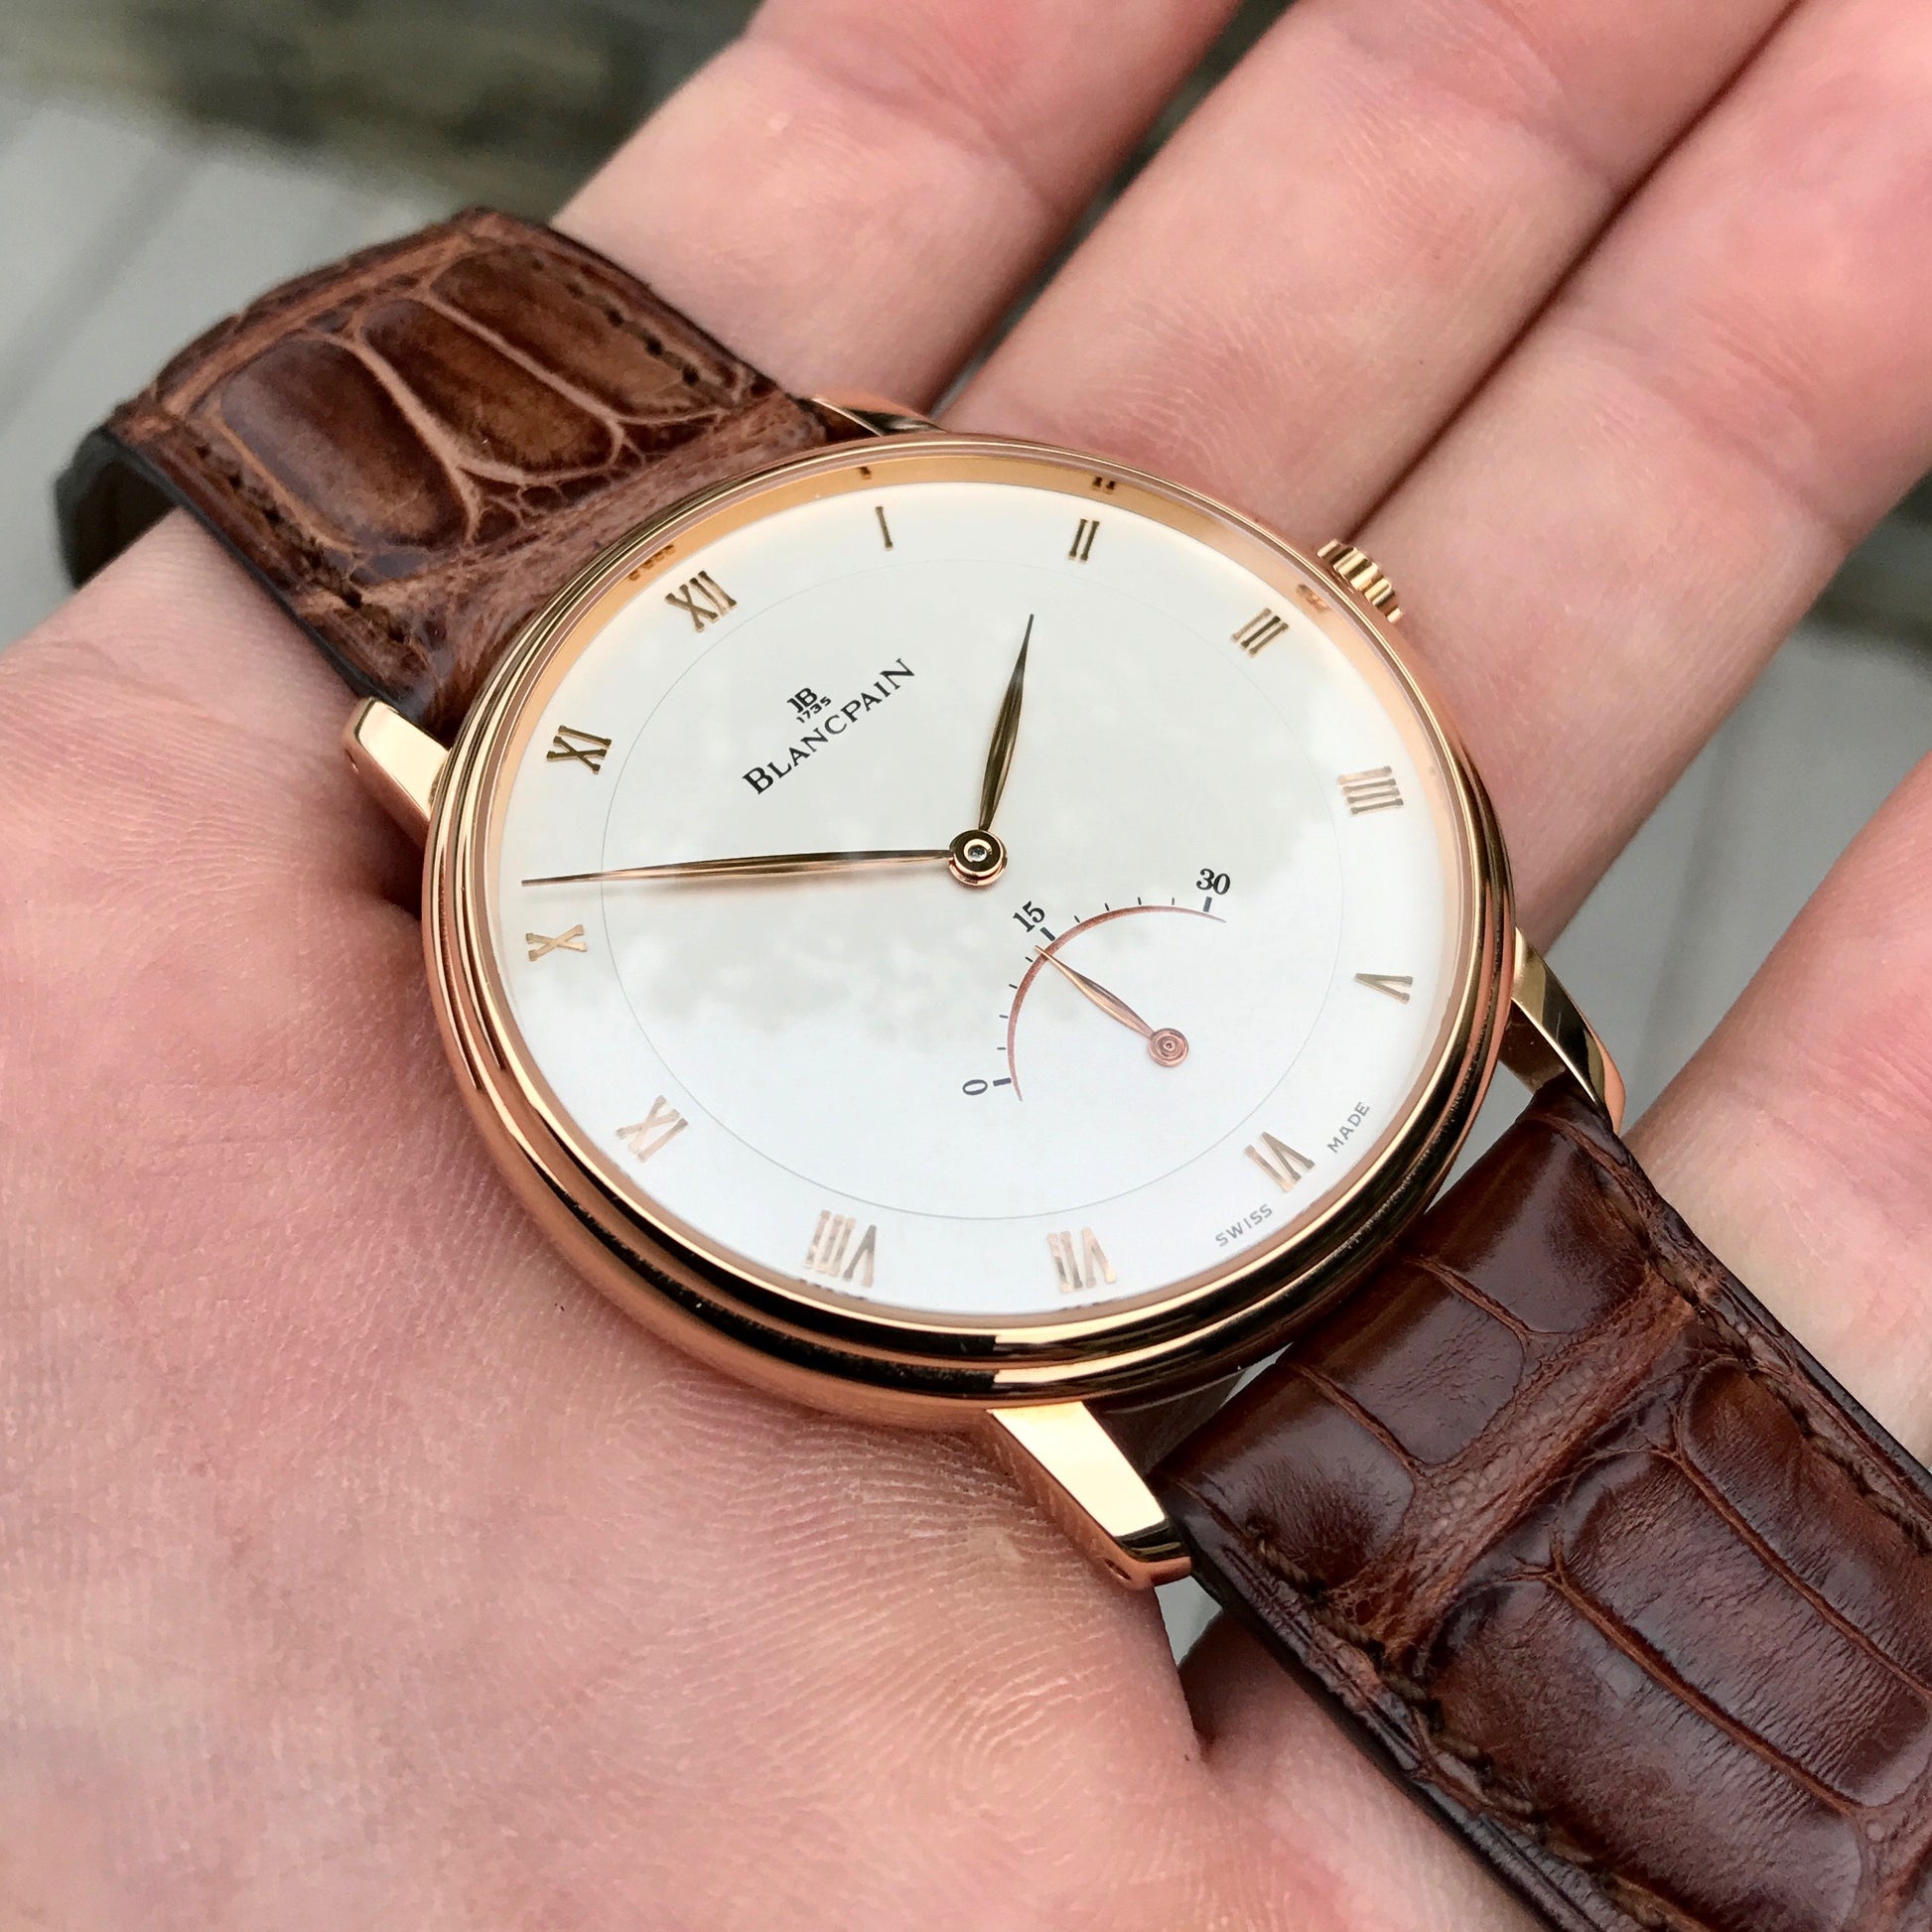 Blancpain Villeret Retrograde Seconds Ultra Slim 4063 18K Rose Gold Leather Automatic Silver Wristwatch - Hashtag Watch Company